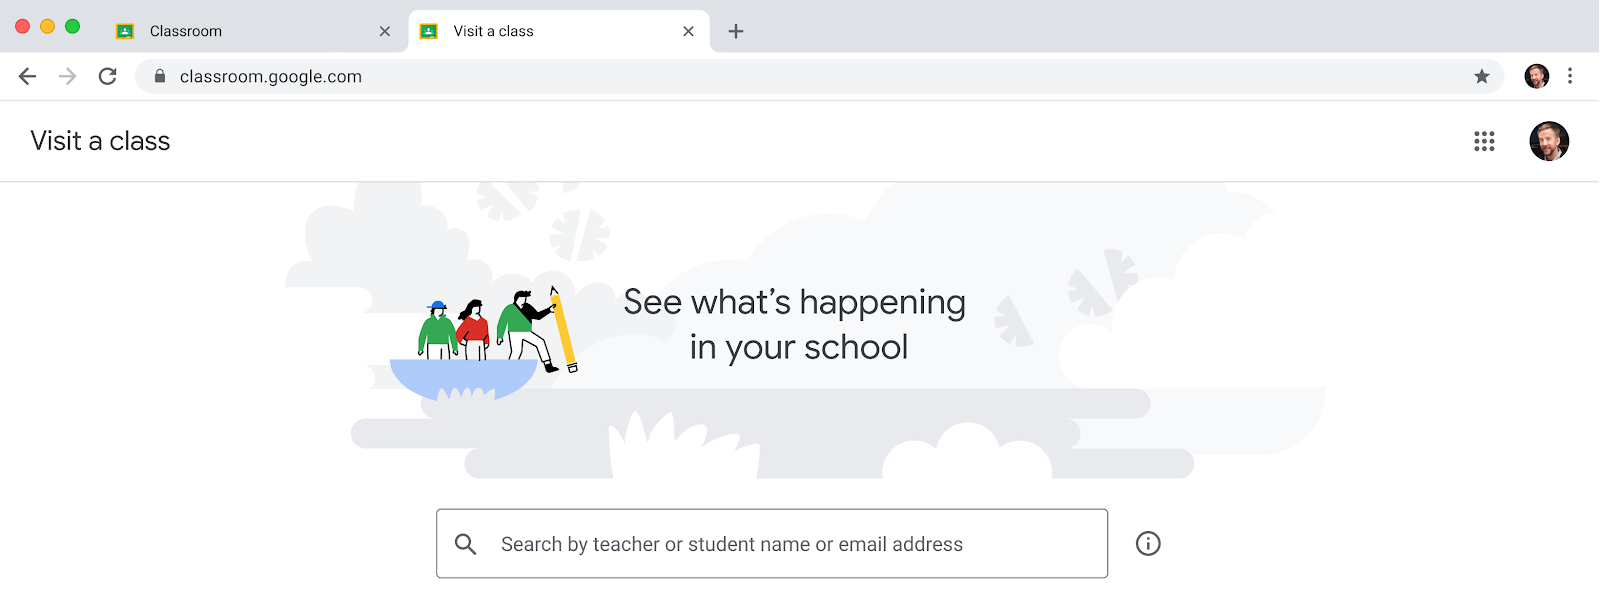 Google Classroom: Getting Started with Google Classroom